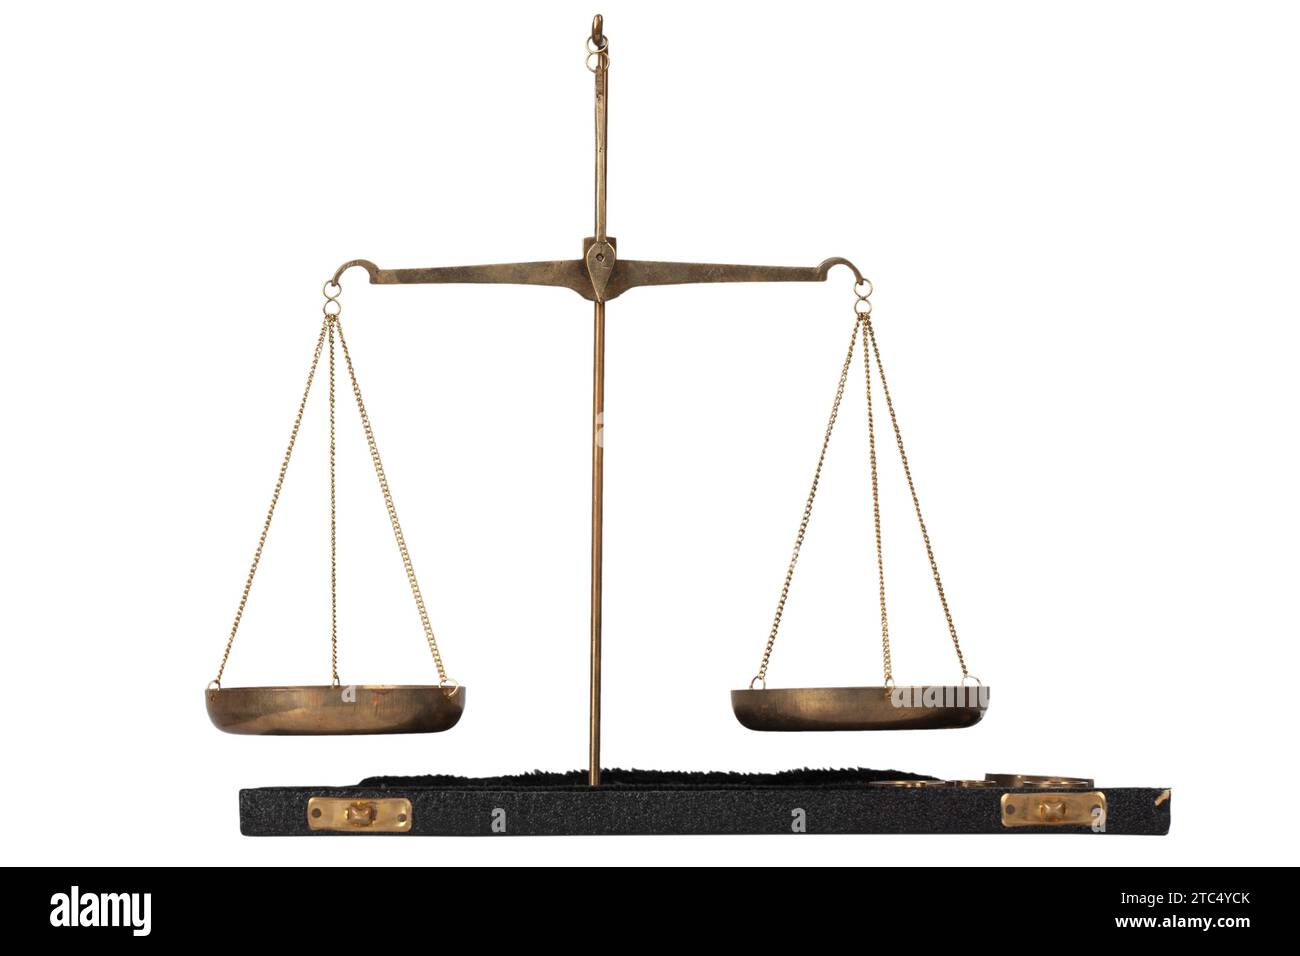 https://c8.alamy.com/comp/2TC4YCK/bronze-traditional-balance-scale-set-with-weights-in-black-box-2TC4YCK.jpg